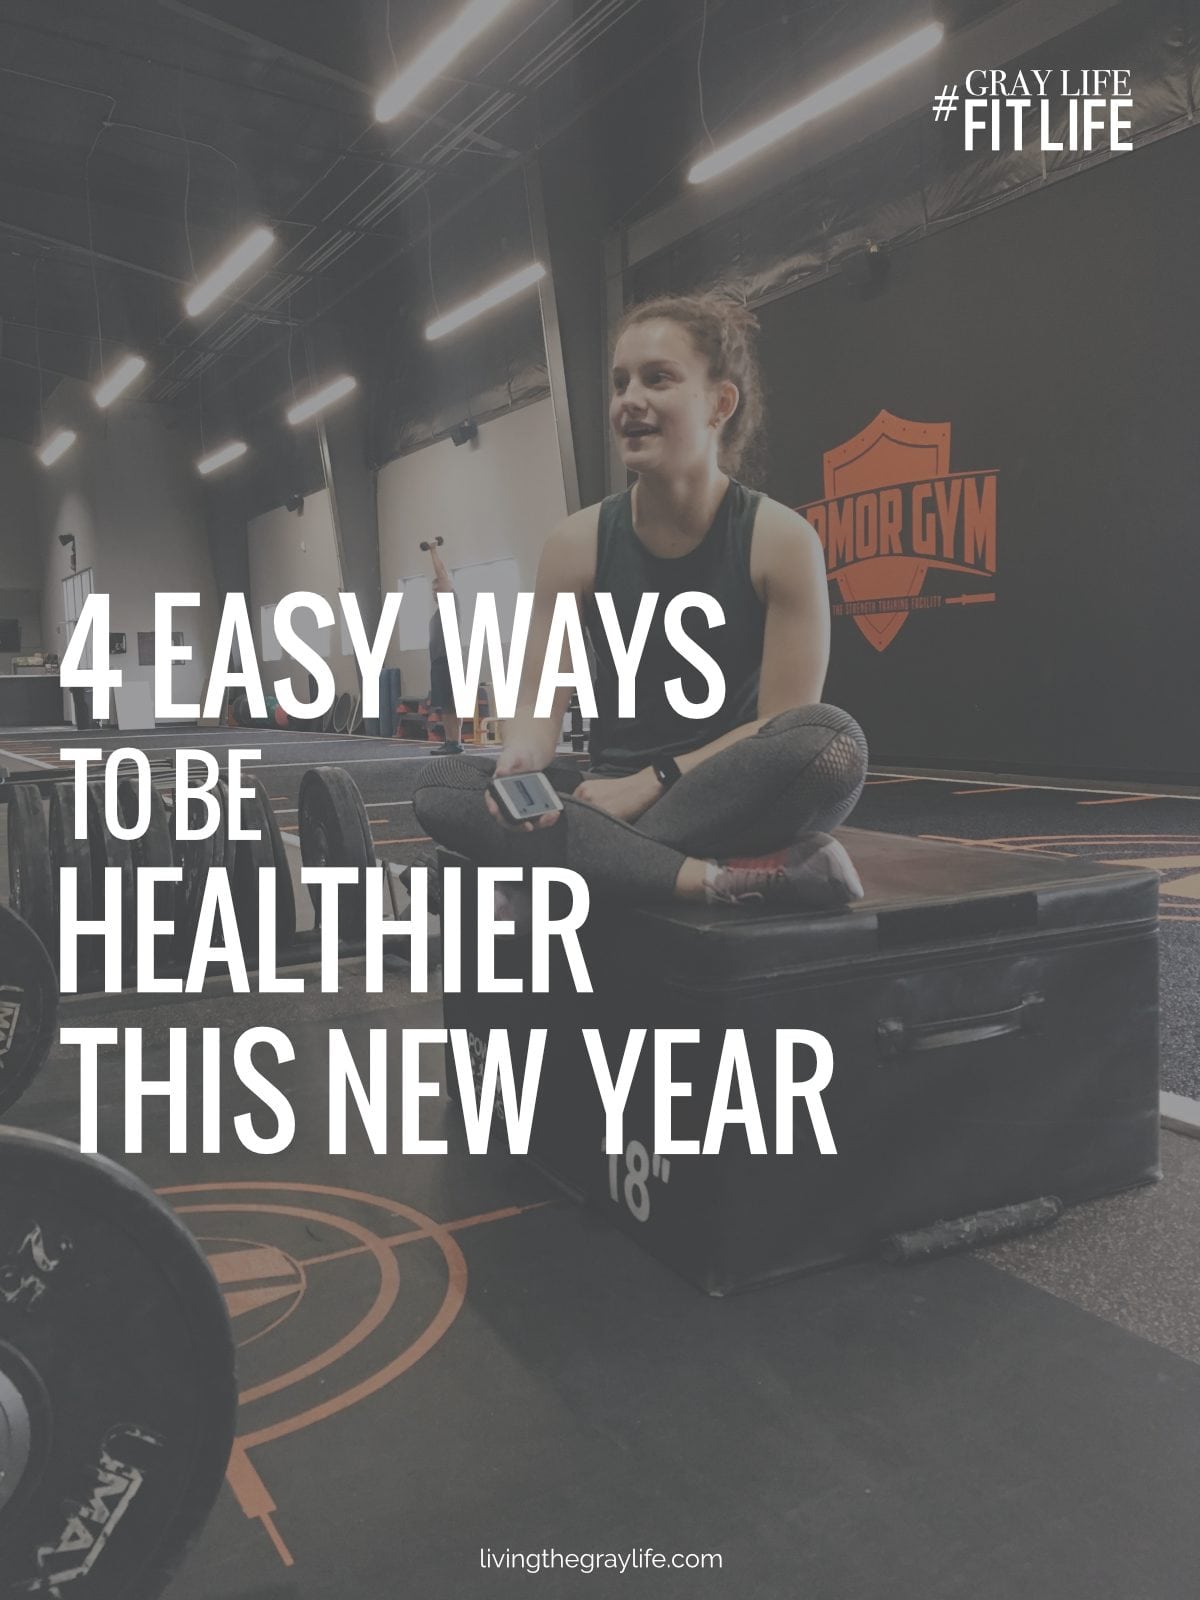 4 Easy Ways to Be Healthier This New Year